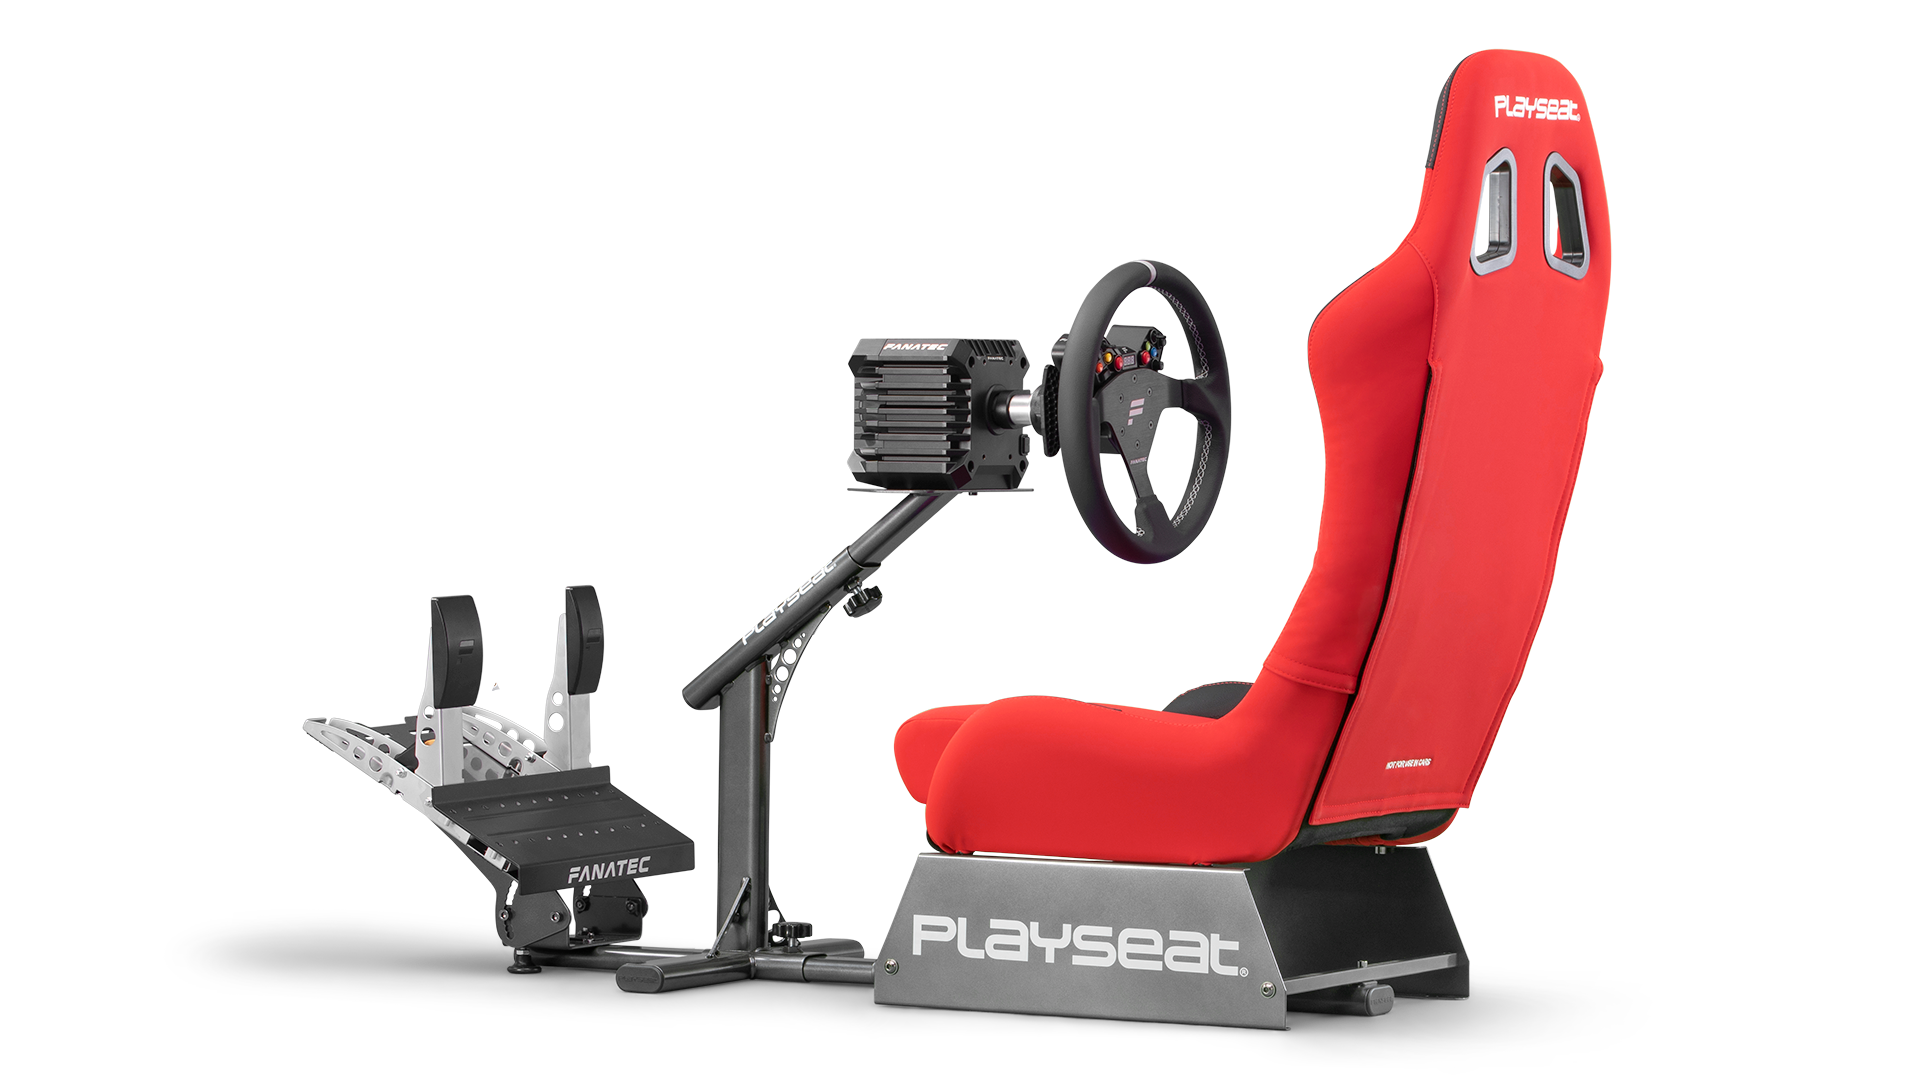 playseat-evolution-red-racing-simulator-back-angle-view-fanatec-1920x1080-1.png